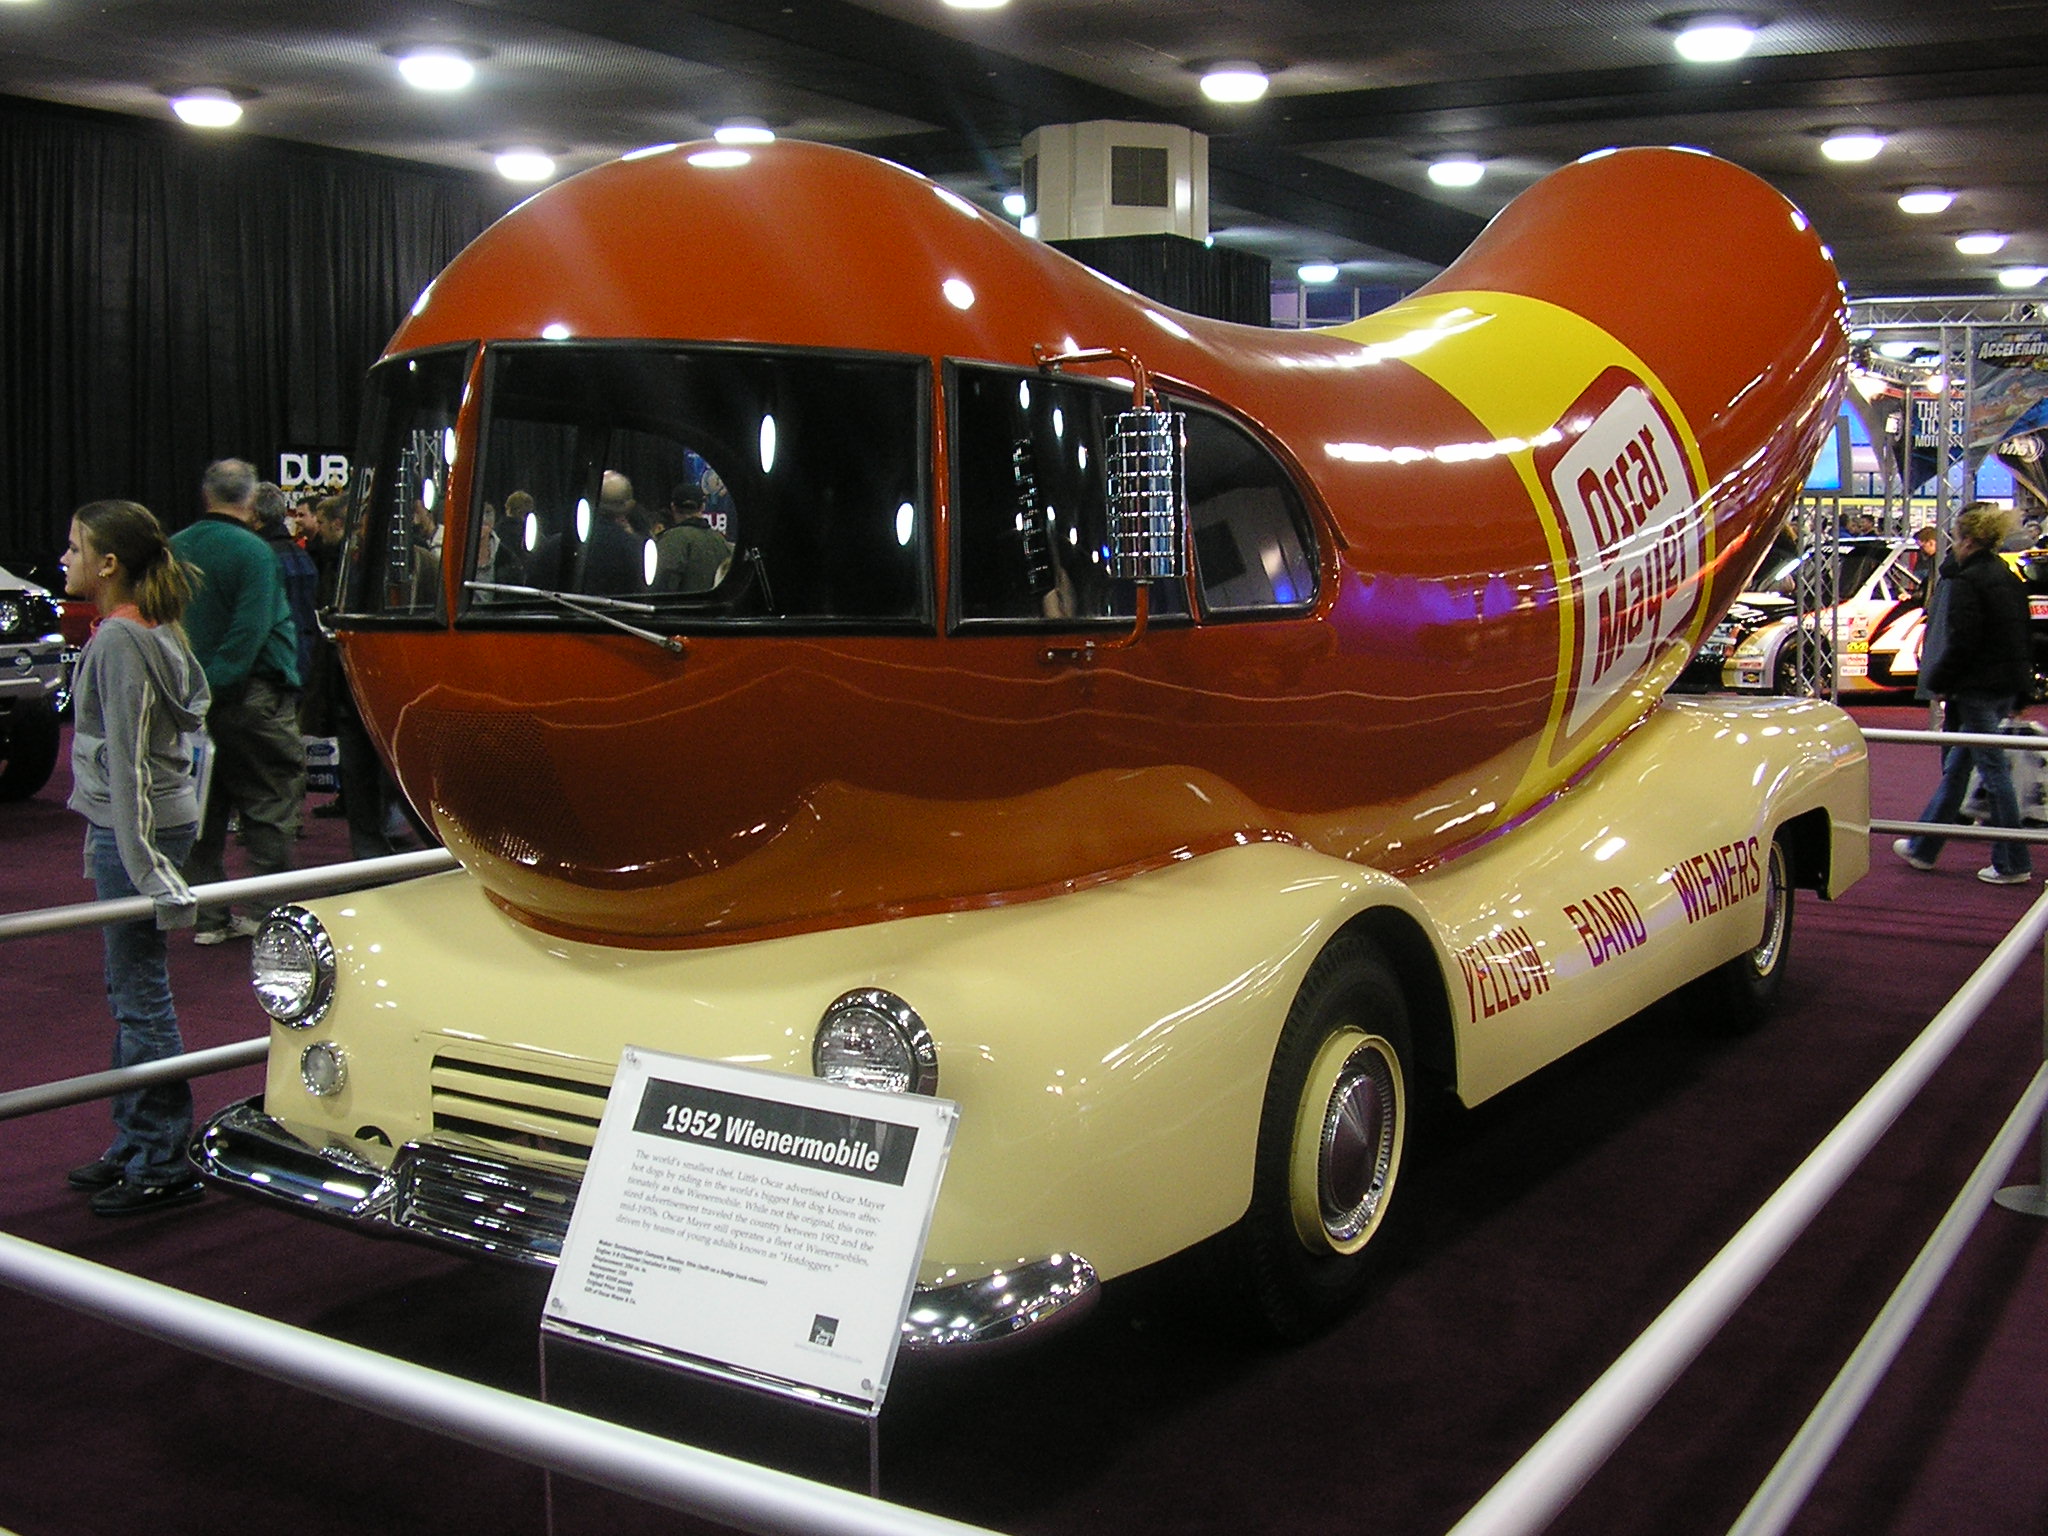 how do i apply to become a hotdogger and drive the oscar mayer wienermobile